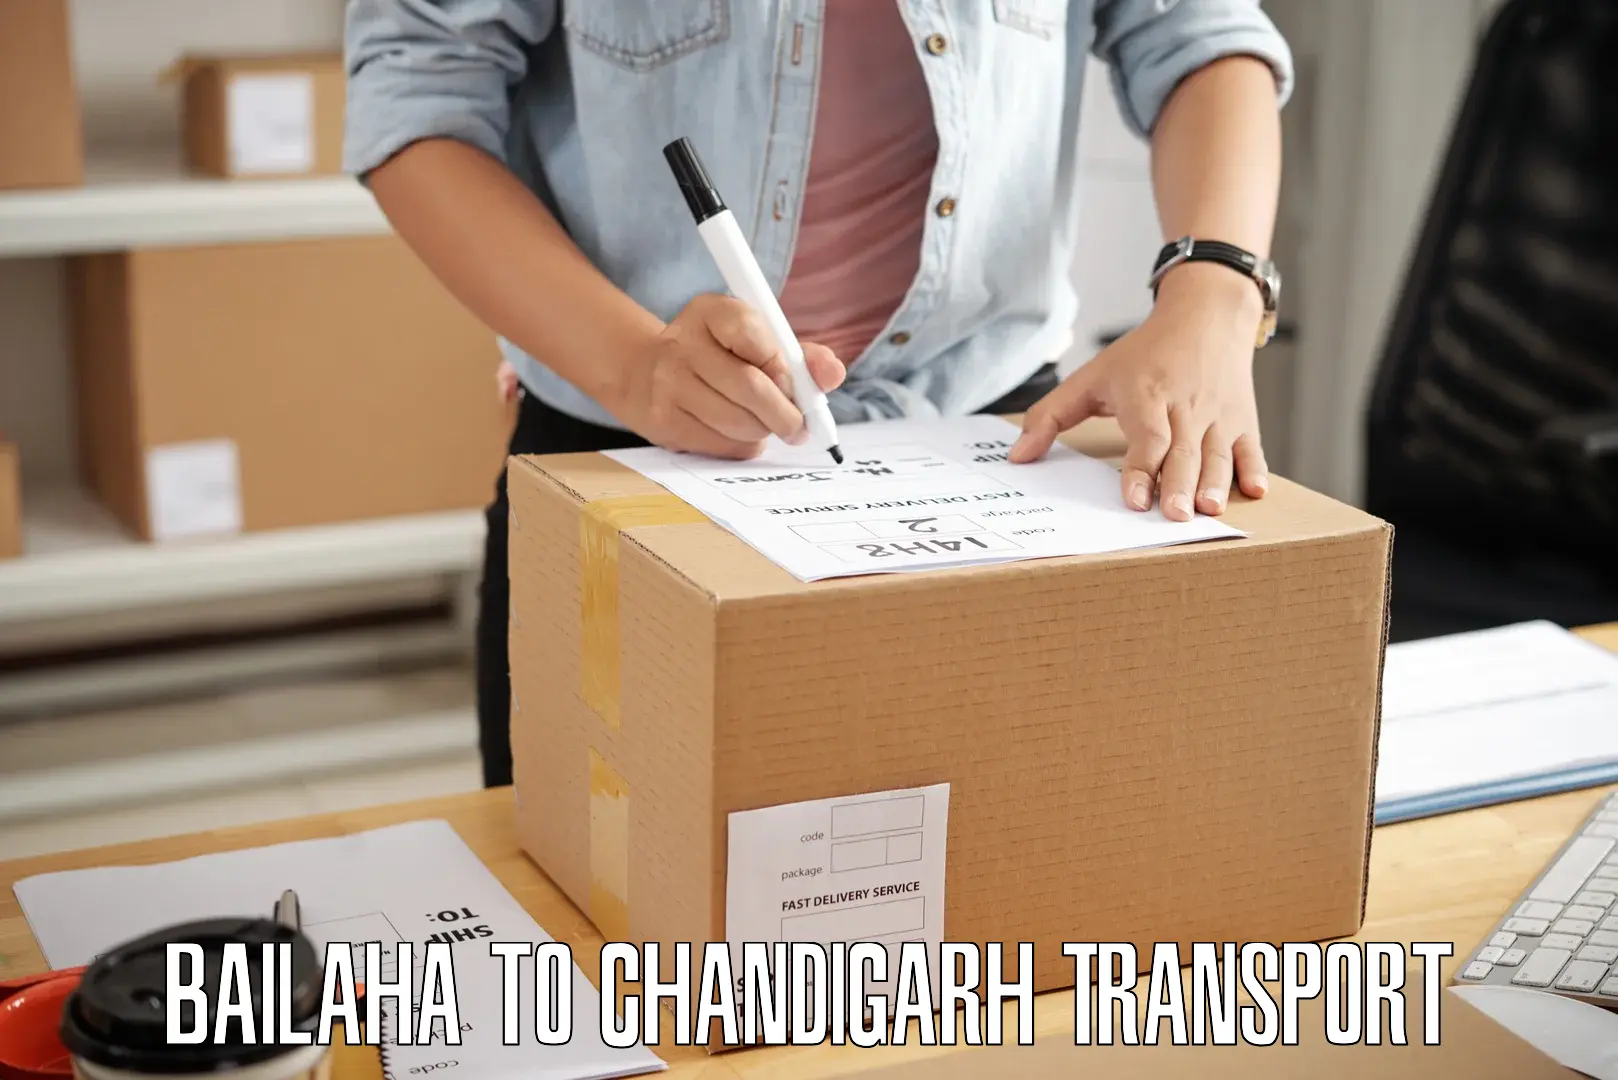 Two wheeler parcel service Bailaha to Chandigarh